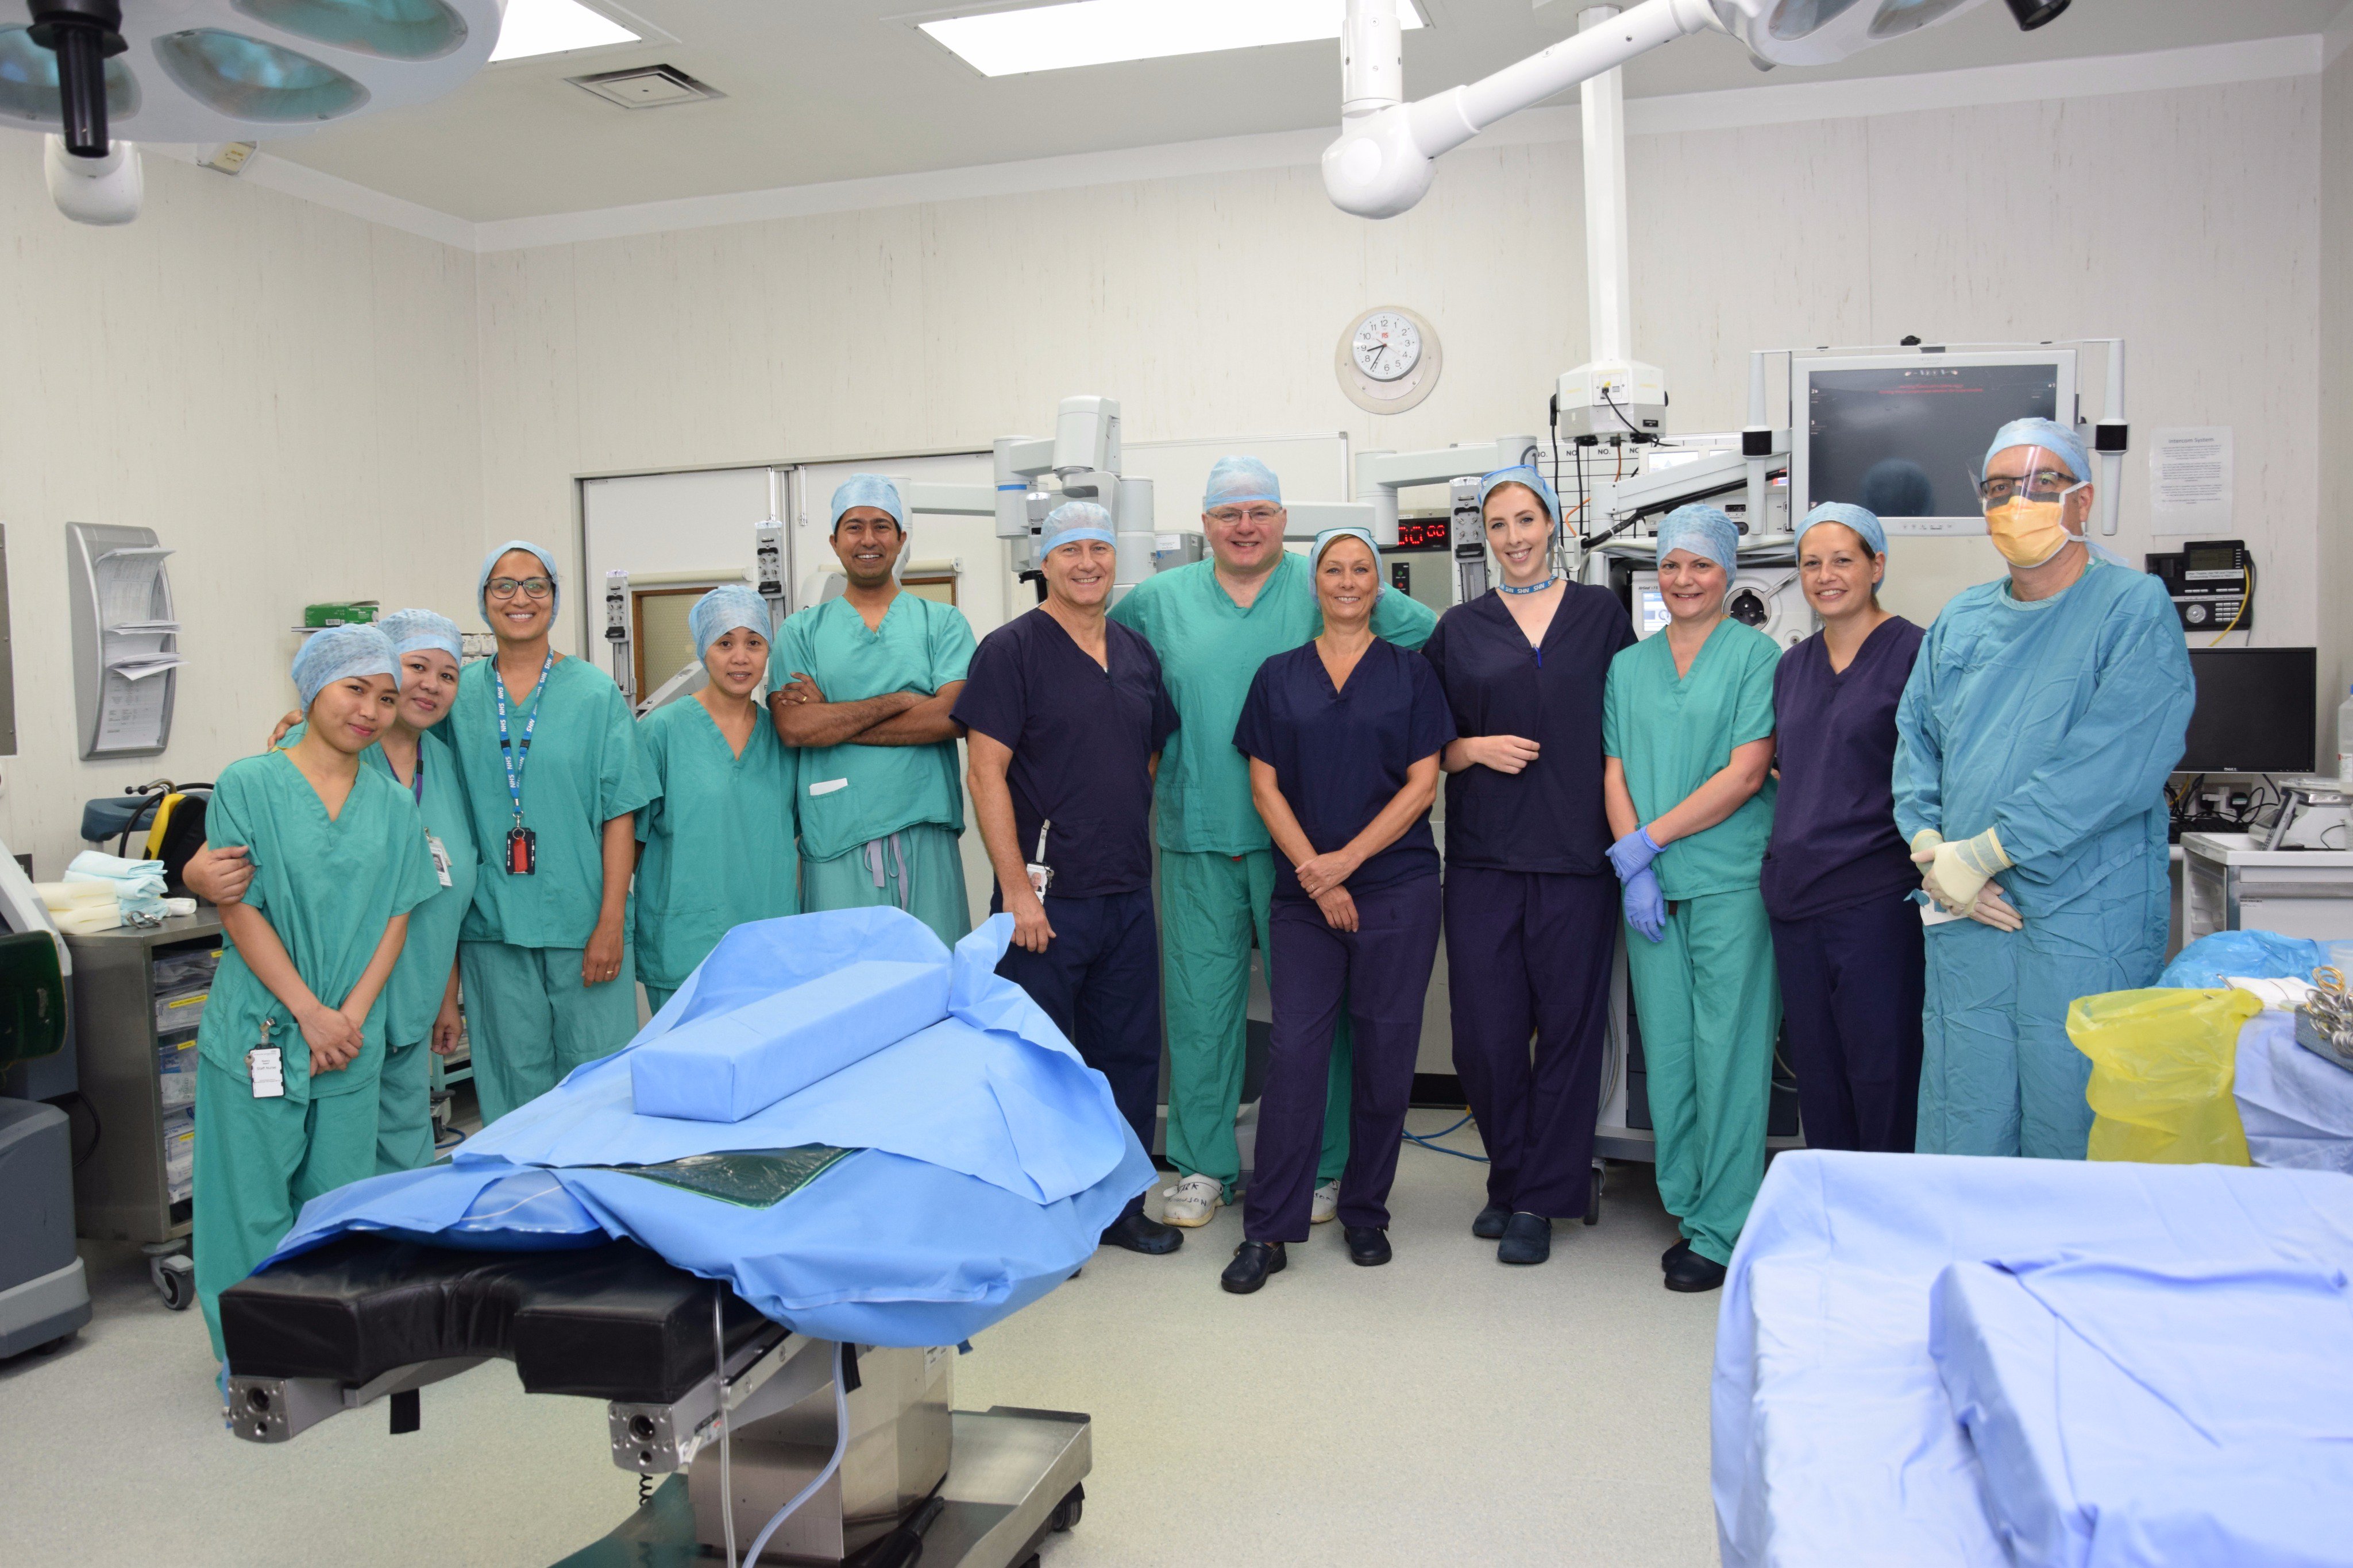 Newcastle Hospitals On Twitter Our Urology Team At Newcastle Hospitals Have Carried Out Their 